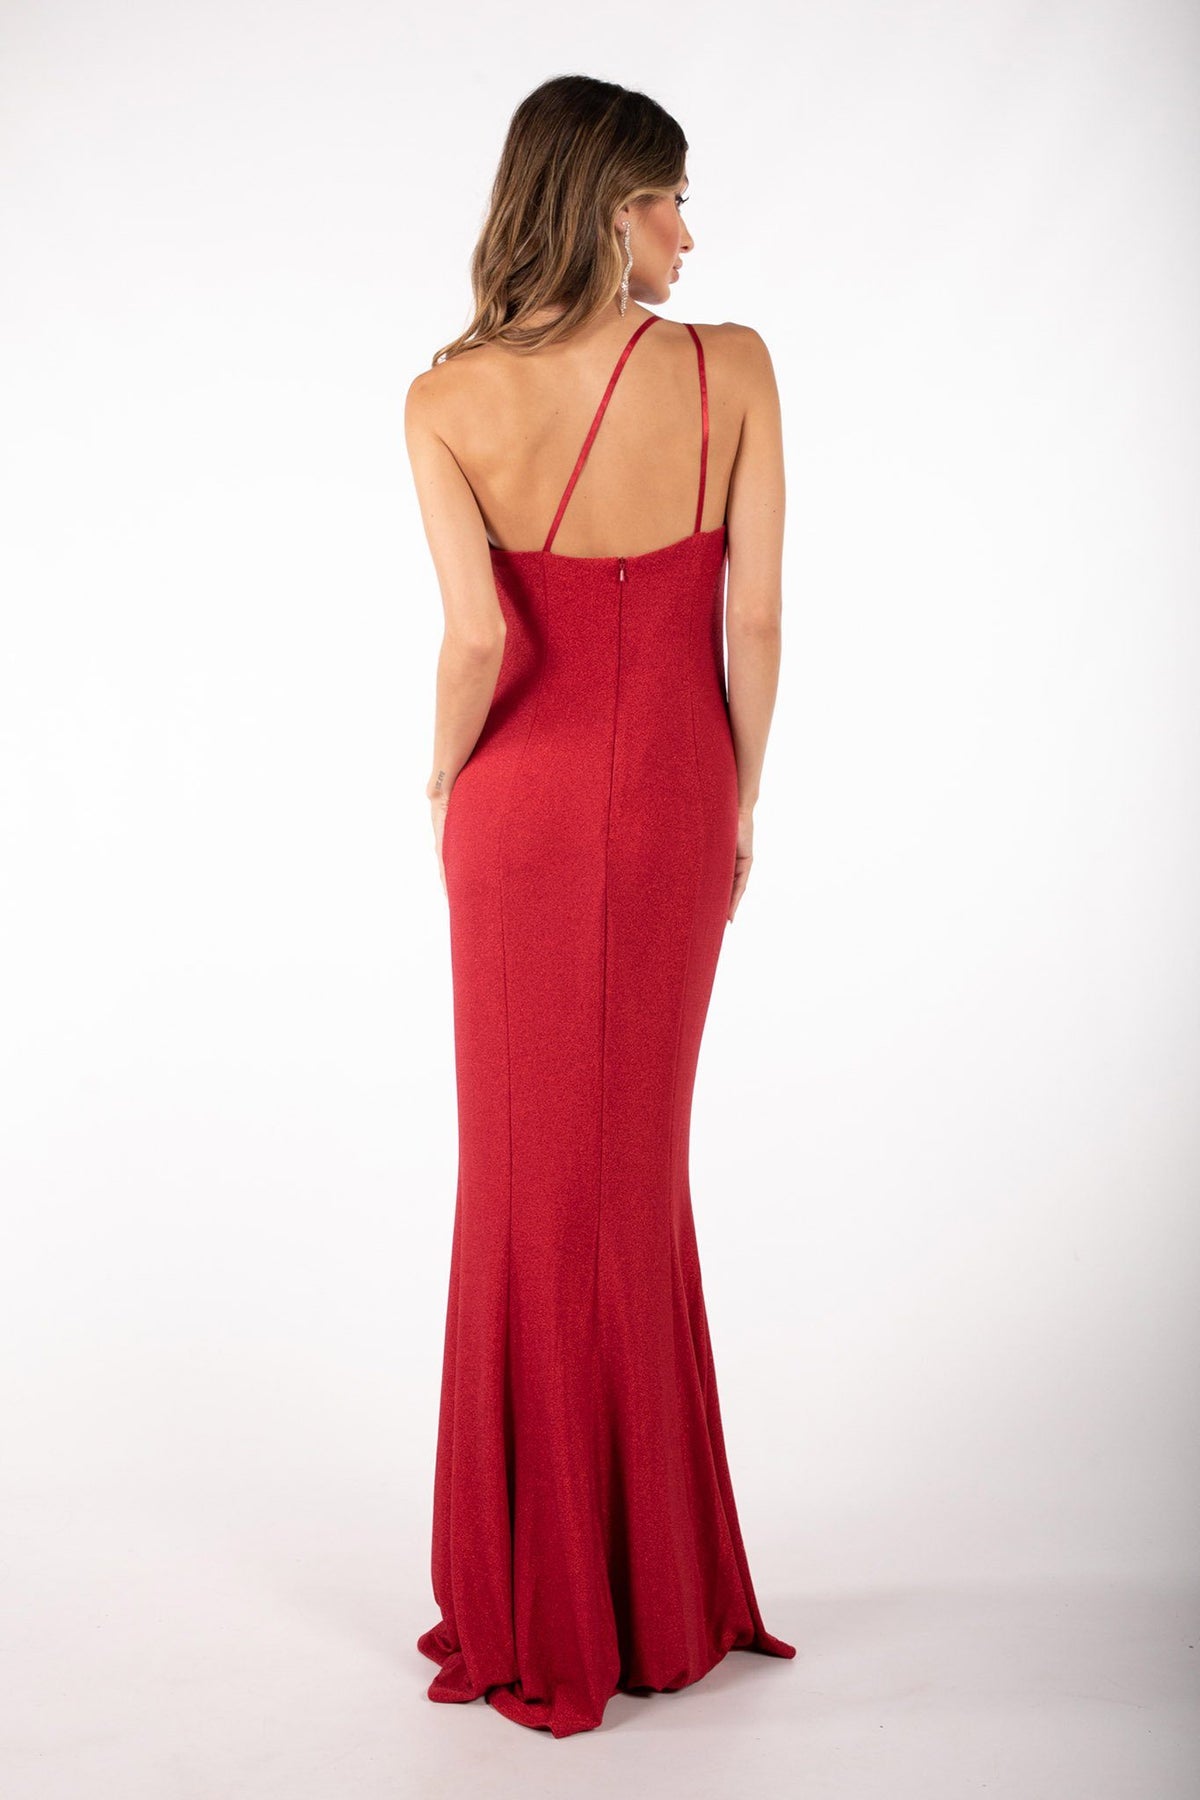 Back image of Shimmer red maxi dress featuring asymmetrical one shoulder neckline, a bodycon fit with gathering detail at the front and thigh-high leg slit